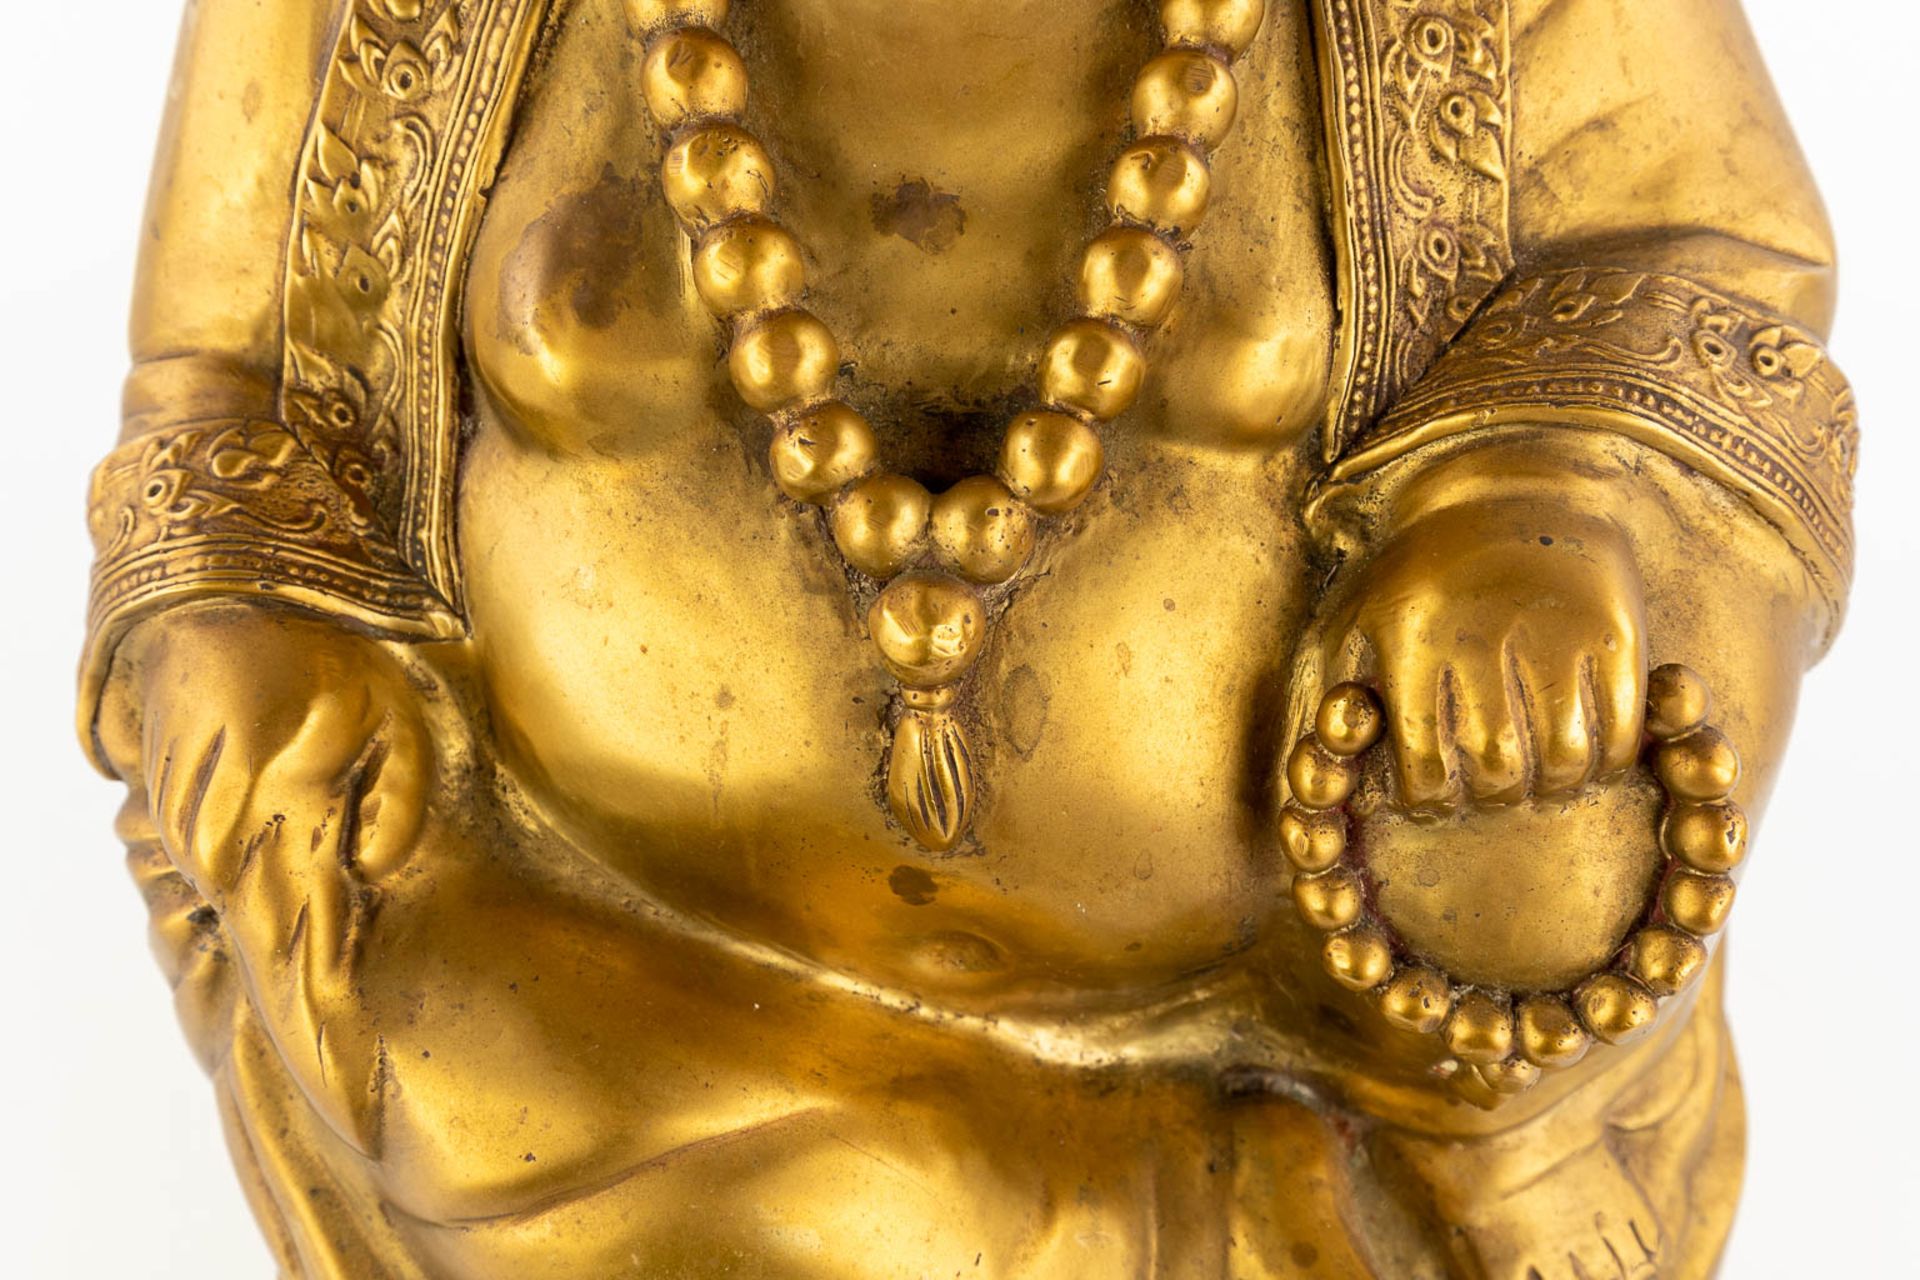 A Chinese laughing buddha, polished bronze. (L:27 x W:27 x H:34 cm) - Image 11 of 11